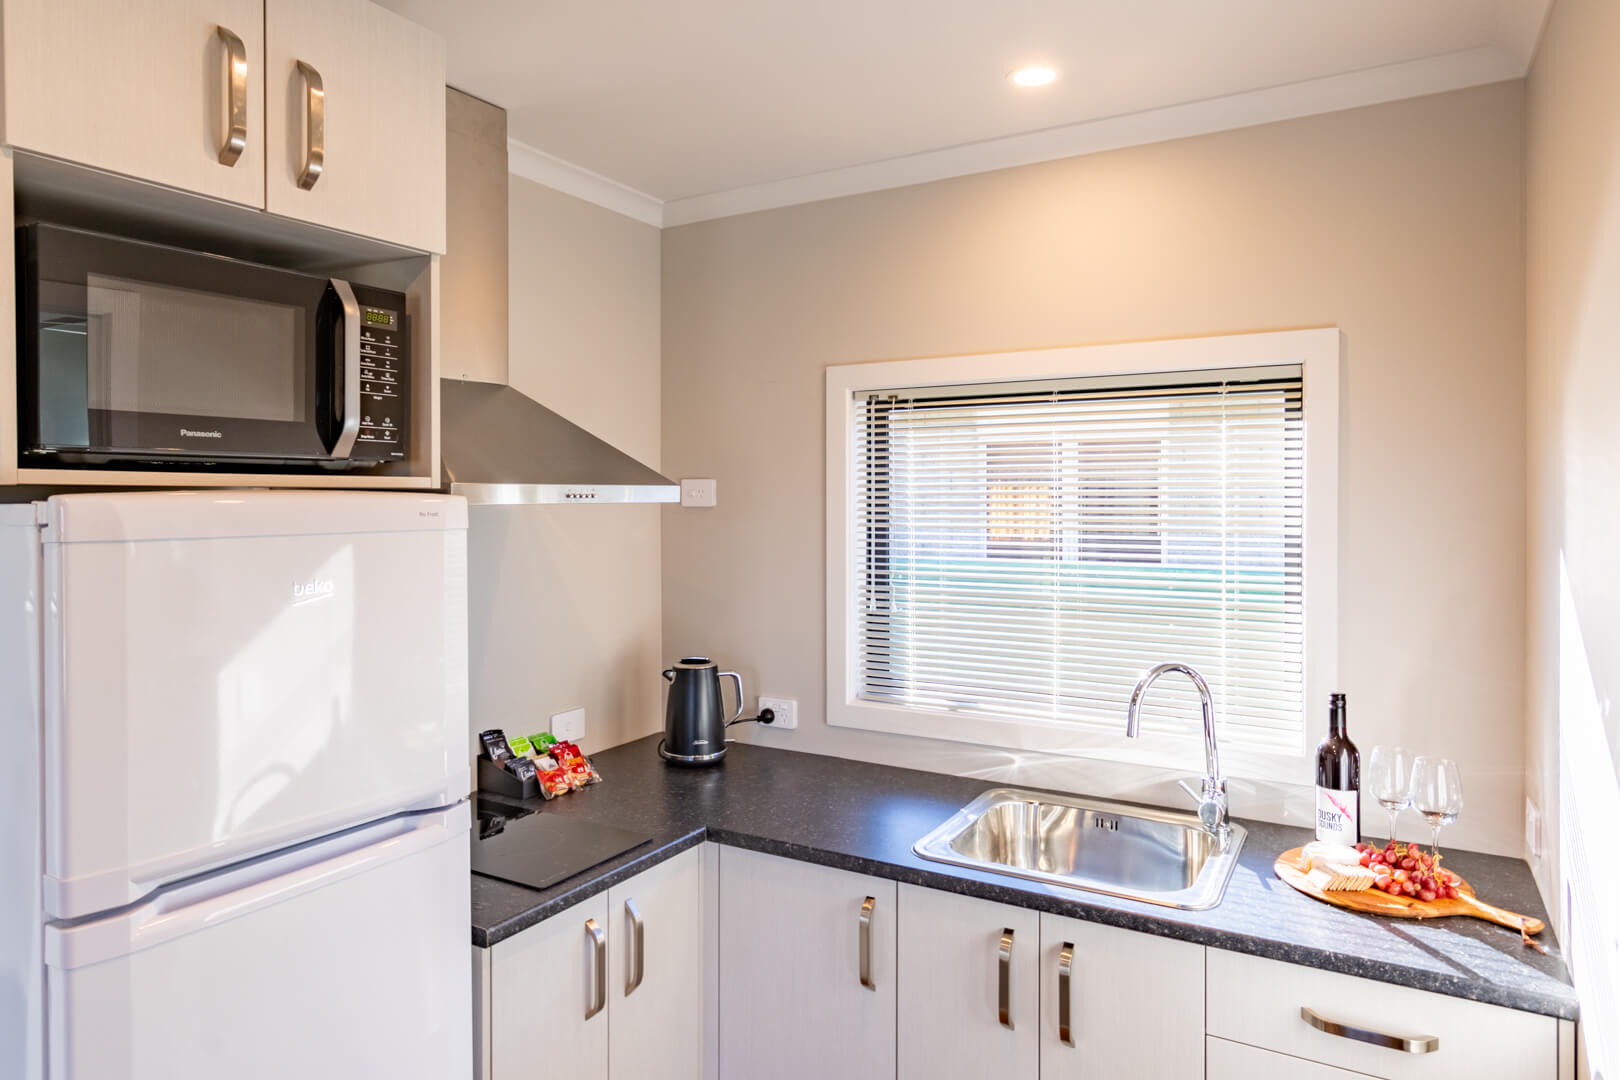 Modern kitchen with fridge, microwave and cooktop in the Dusky Motels two-bedroom suite.